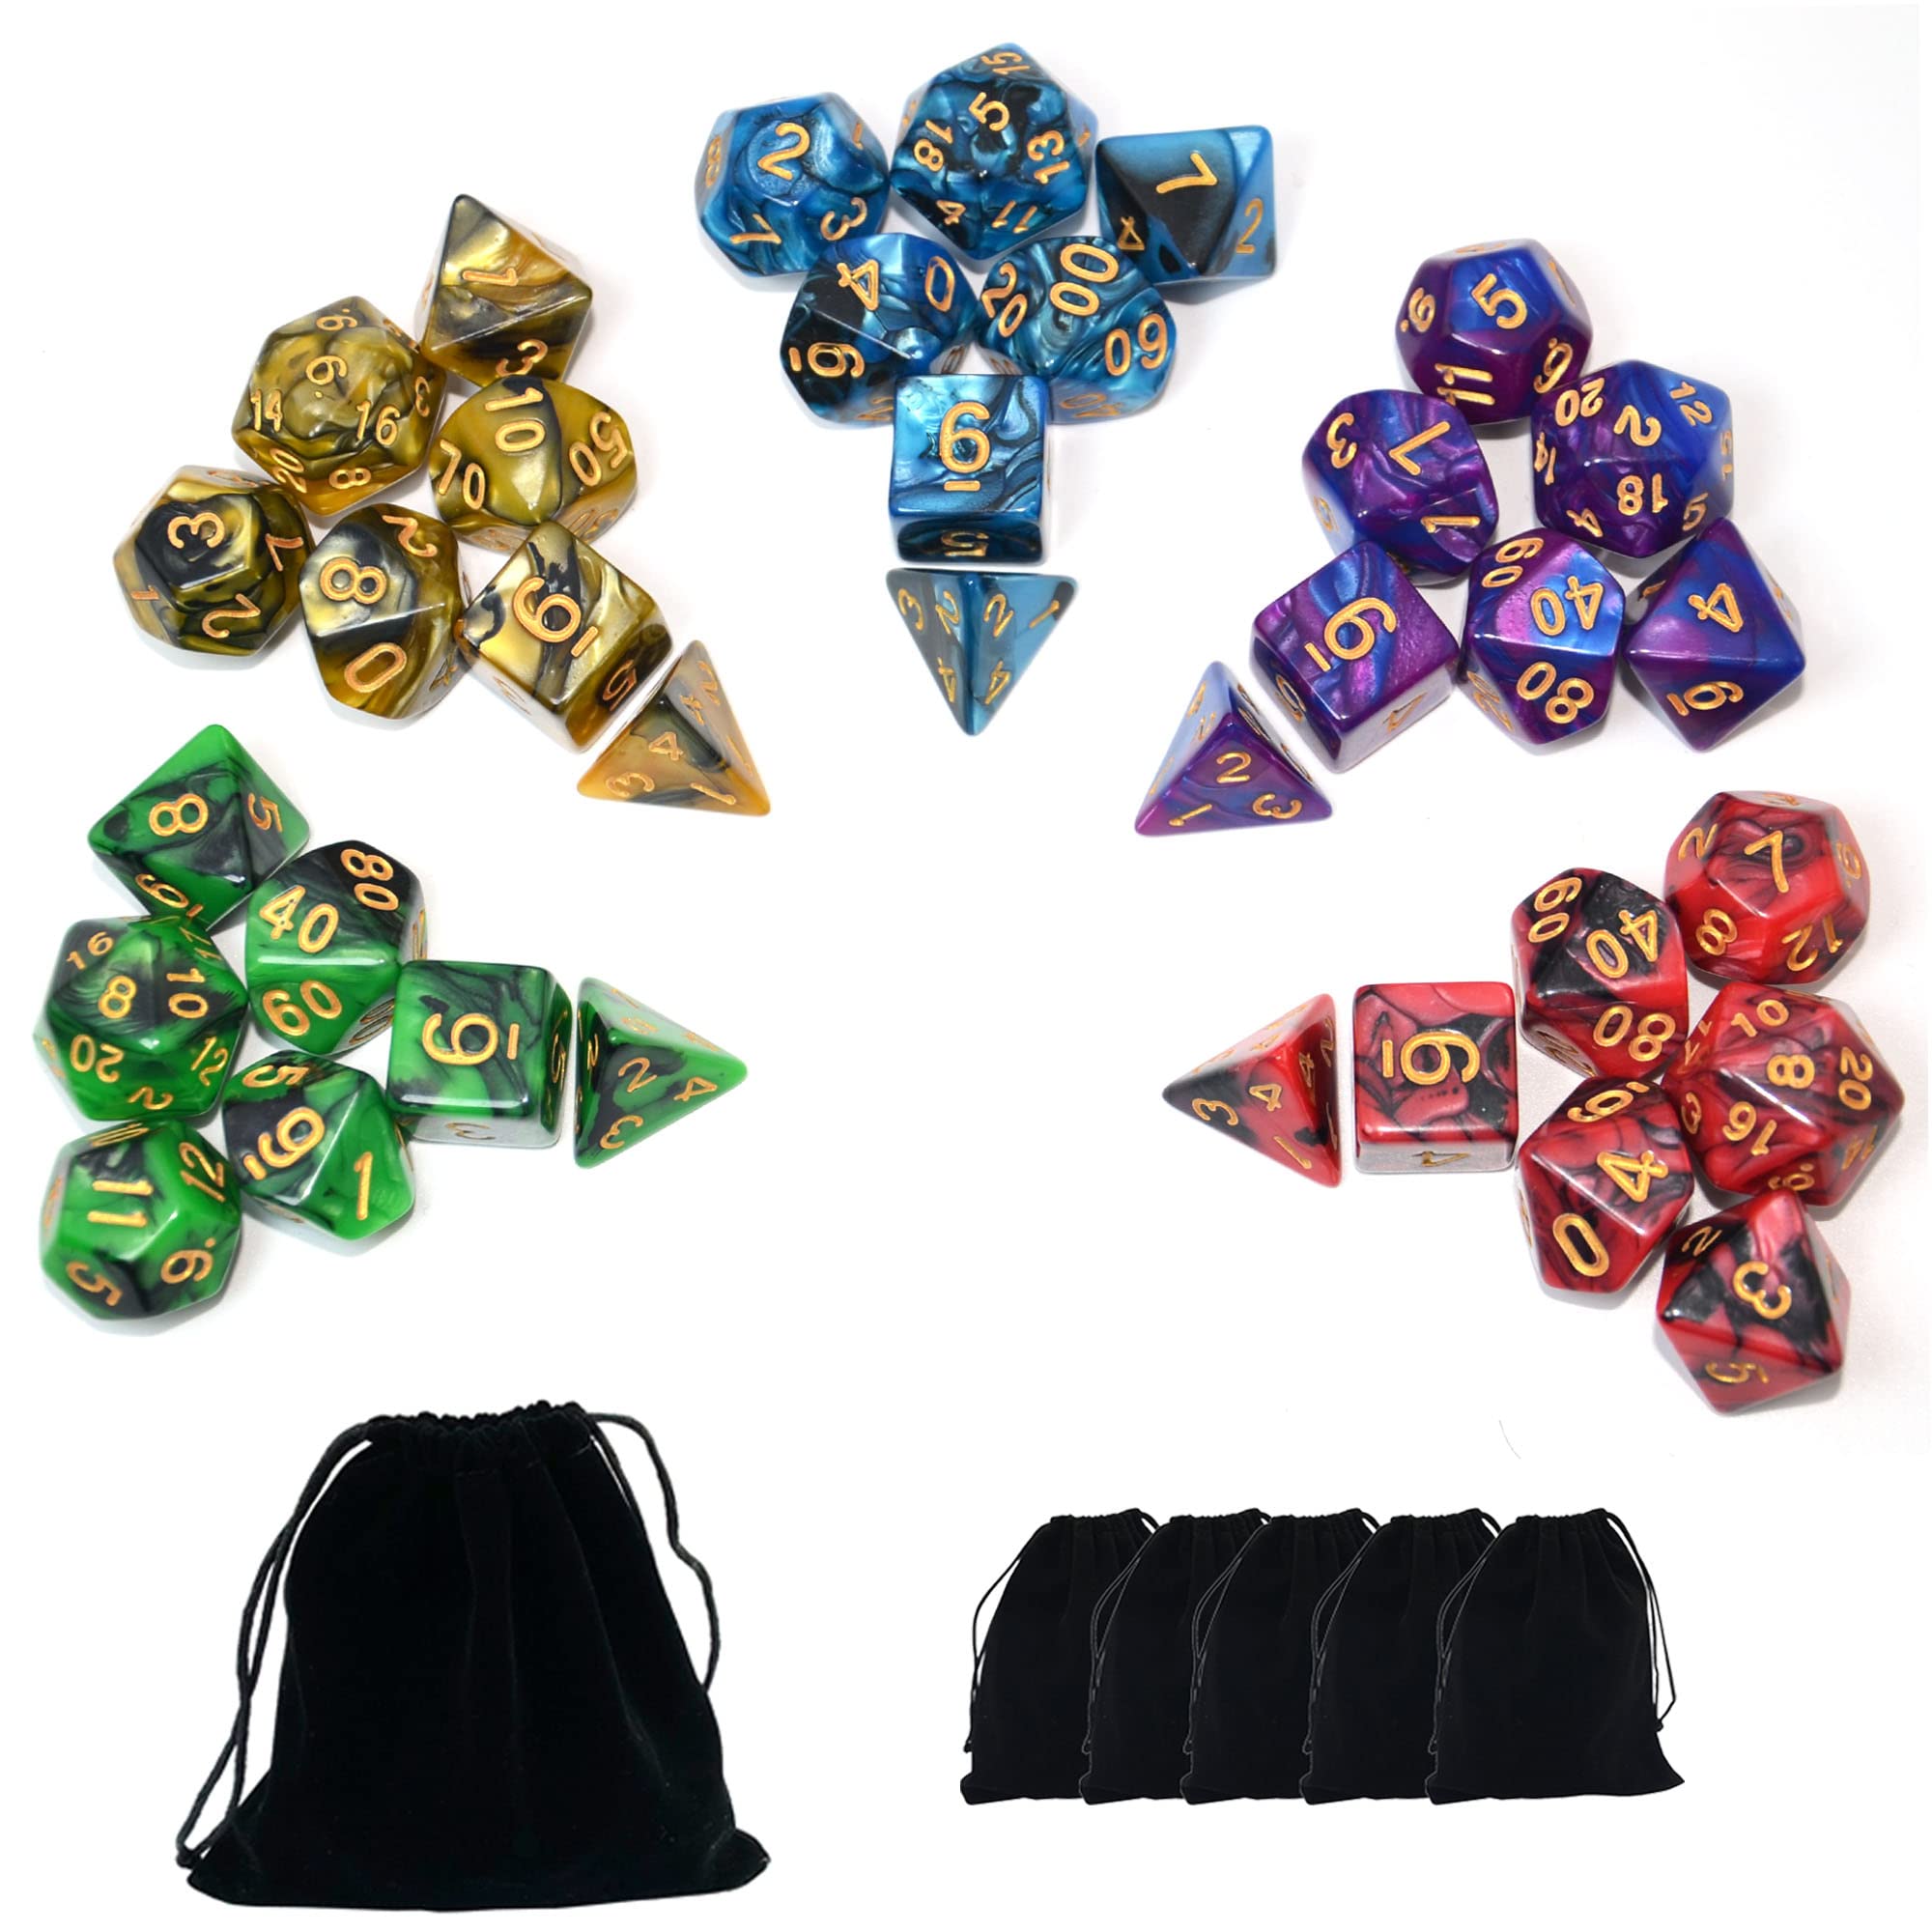 Smartdealspro 5 x 7-Die Double-Colors Polyhedral Dice Sets with Pouches for DD DND RPG MTG Dungeon and Dragons Table Board R